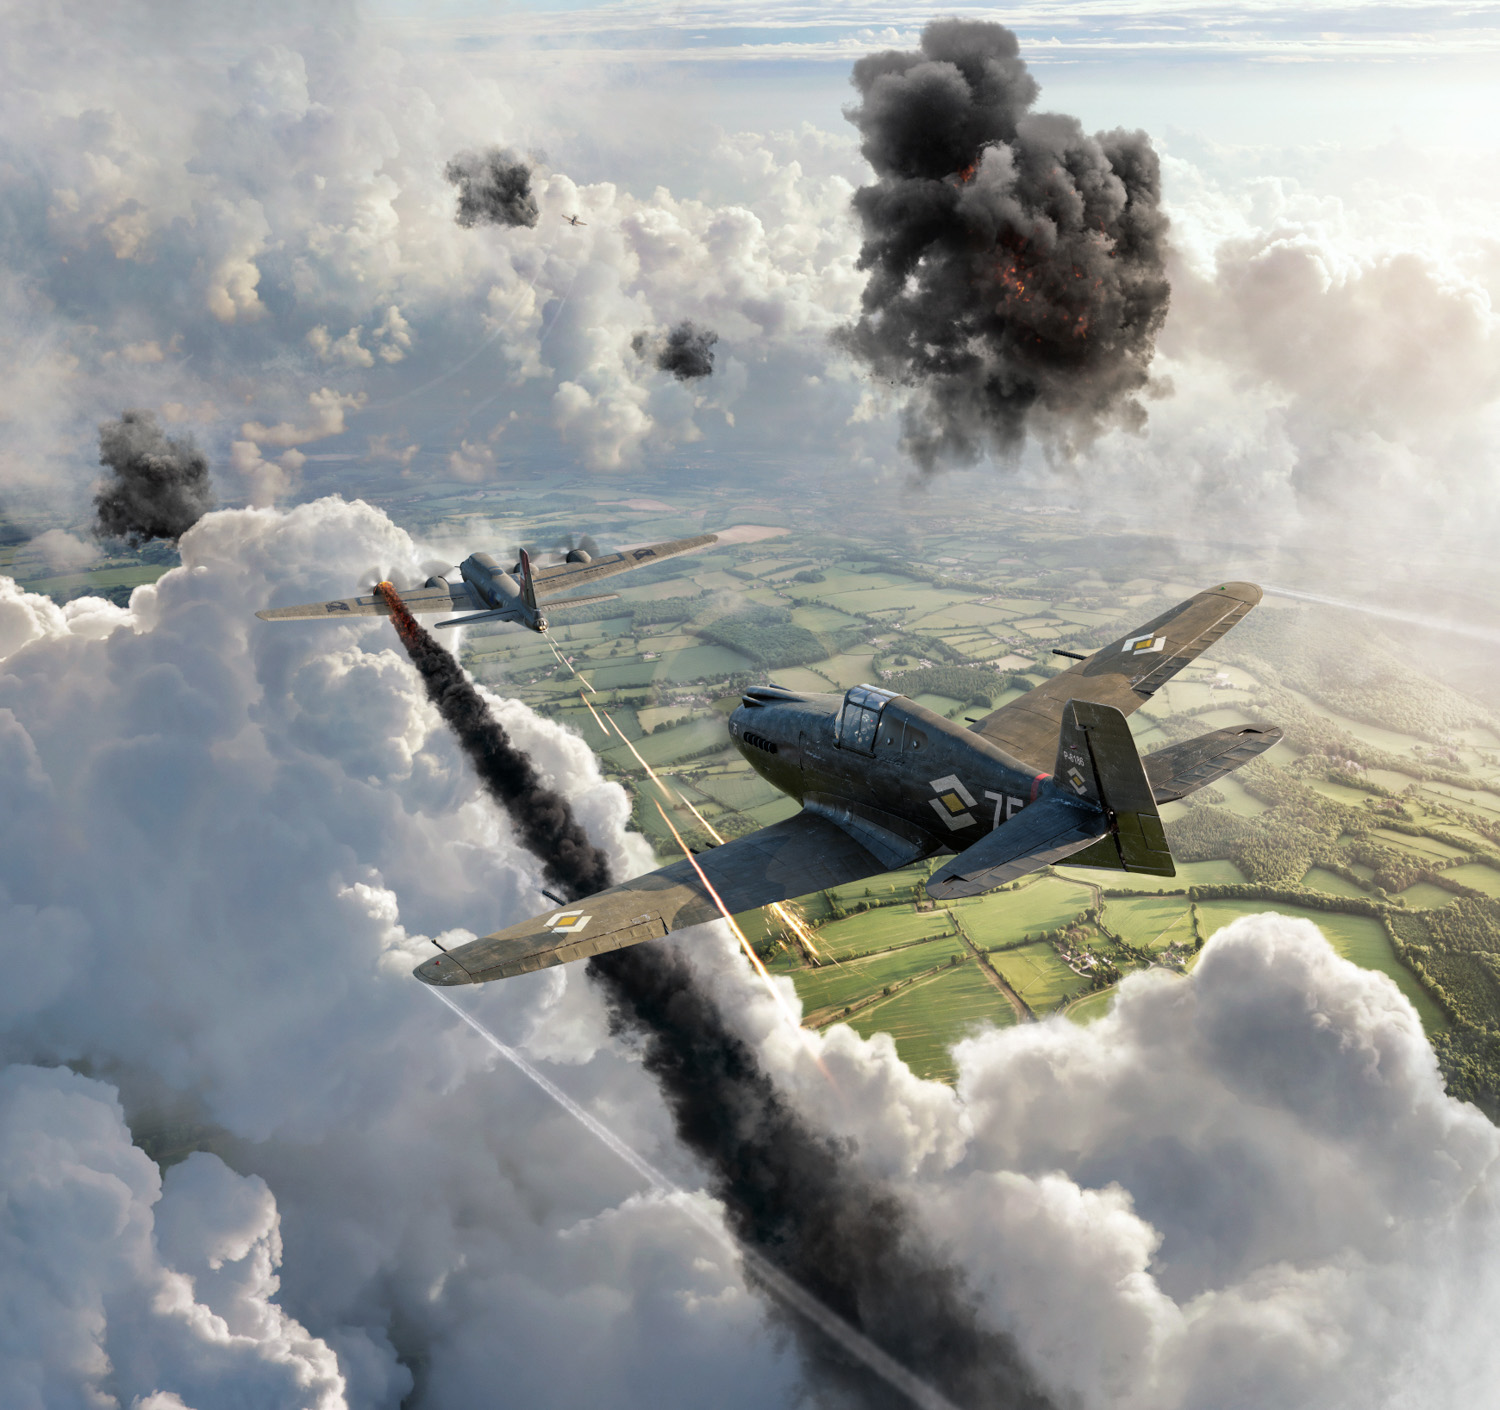 Electric Art created a digitally rendered scene for IMAX of two airplanes in a dogfight flying over a field. 